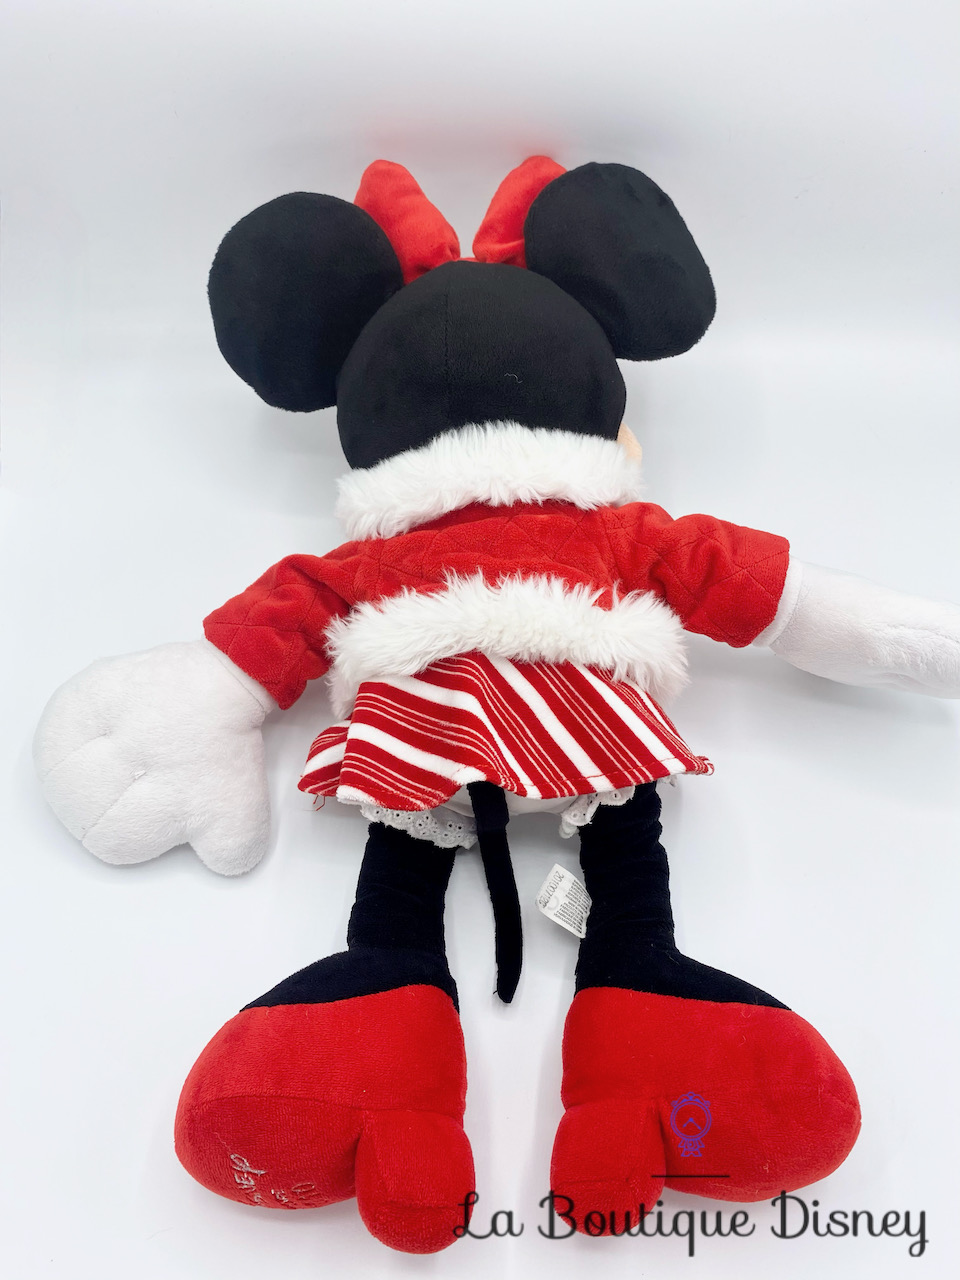 Peluche-minnie-mouse-noel-disney-store-2010-occasion-rouge-blanc (6)